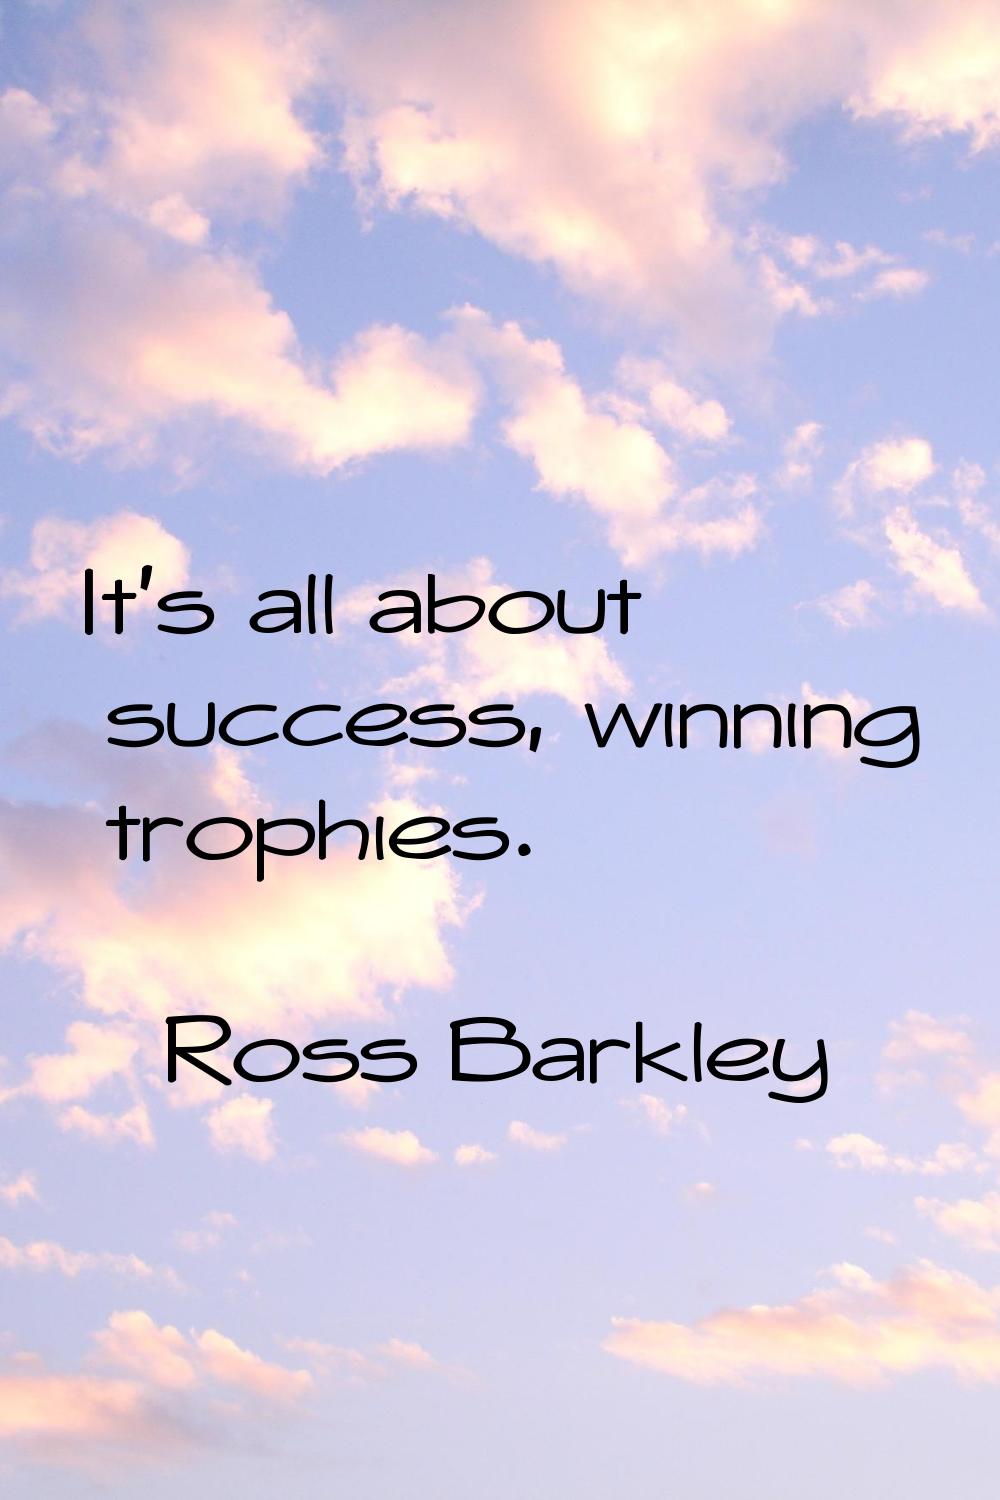 It's all about success, winning trophies.